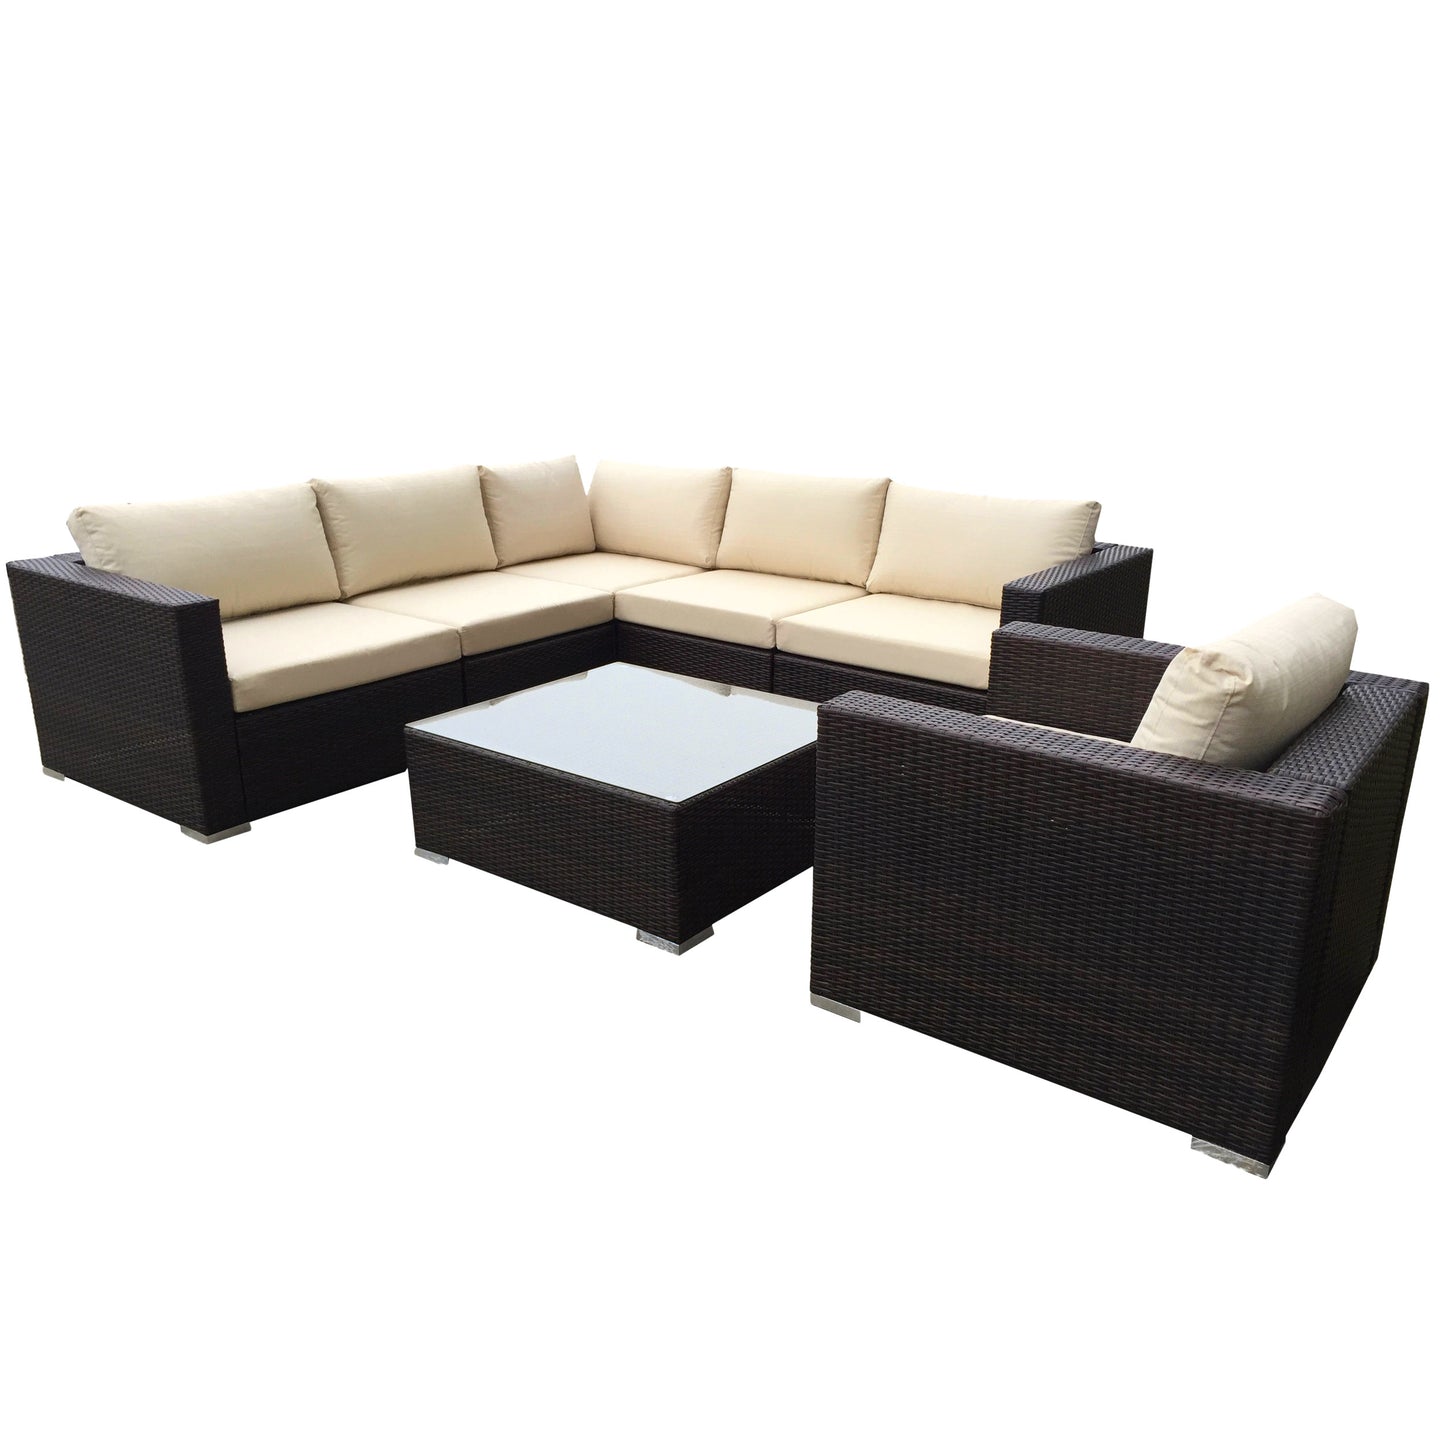 Francisco 7pc Outdoor Brown Wicker Seating Sectional Set w/ Cushions